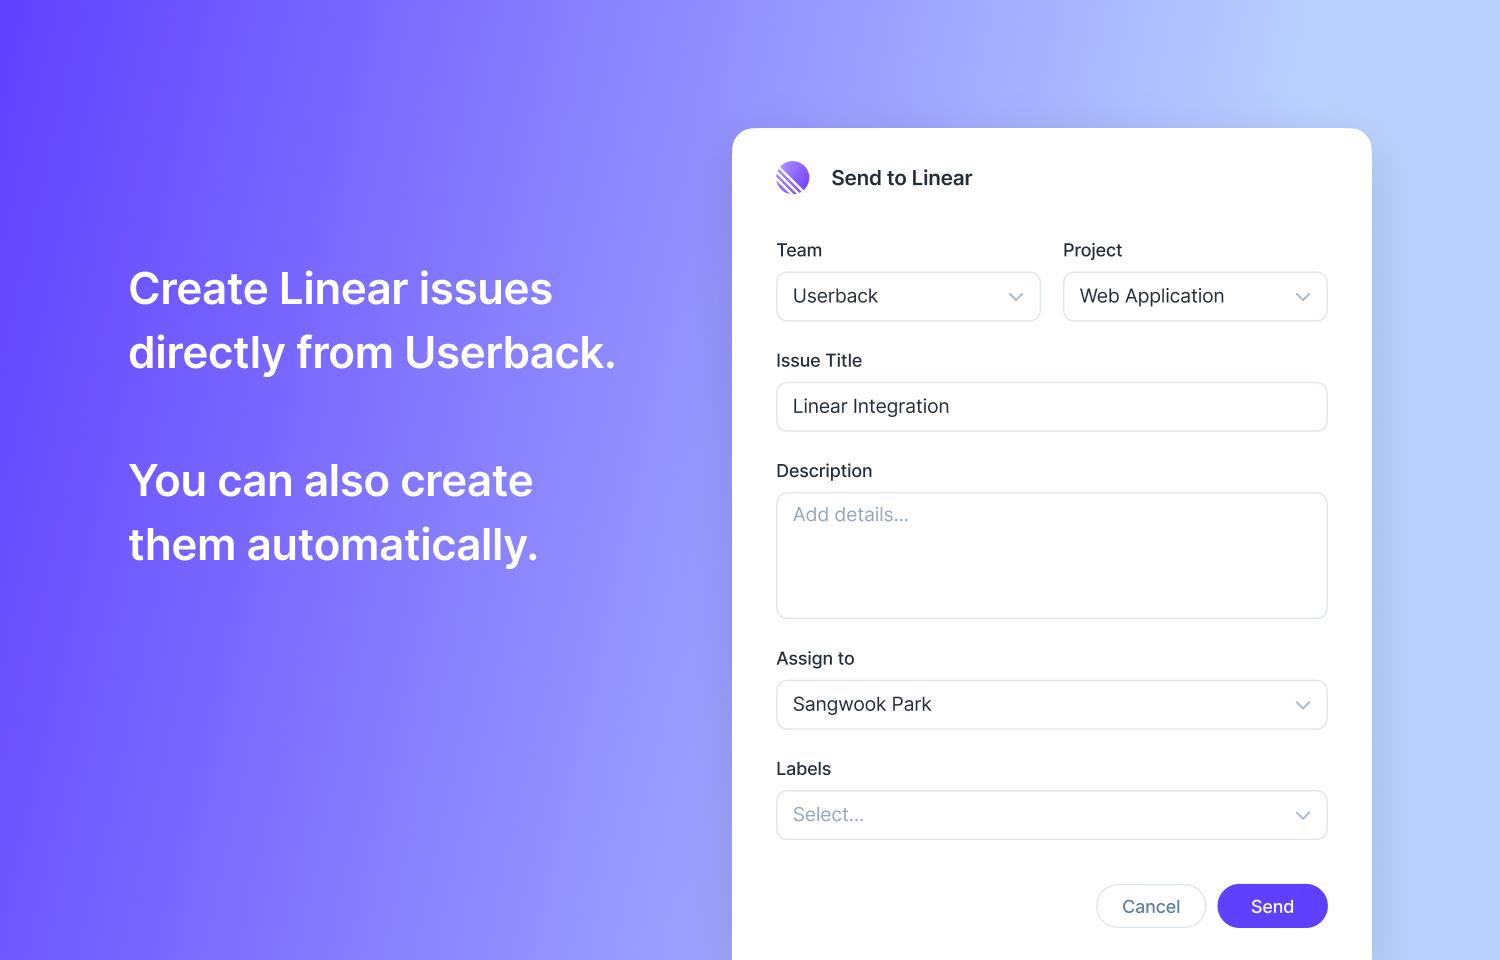 Userback interface showing a submission modal to create Linear issues